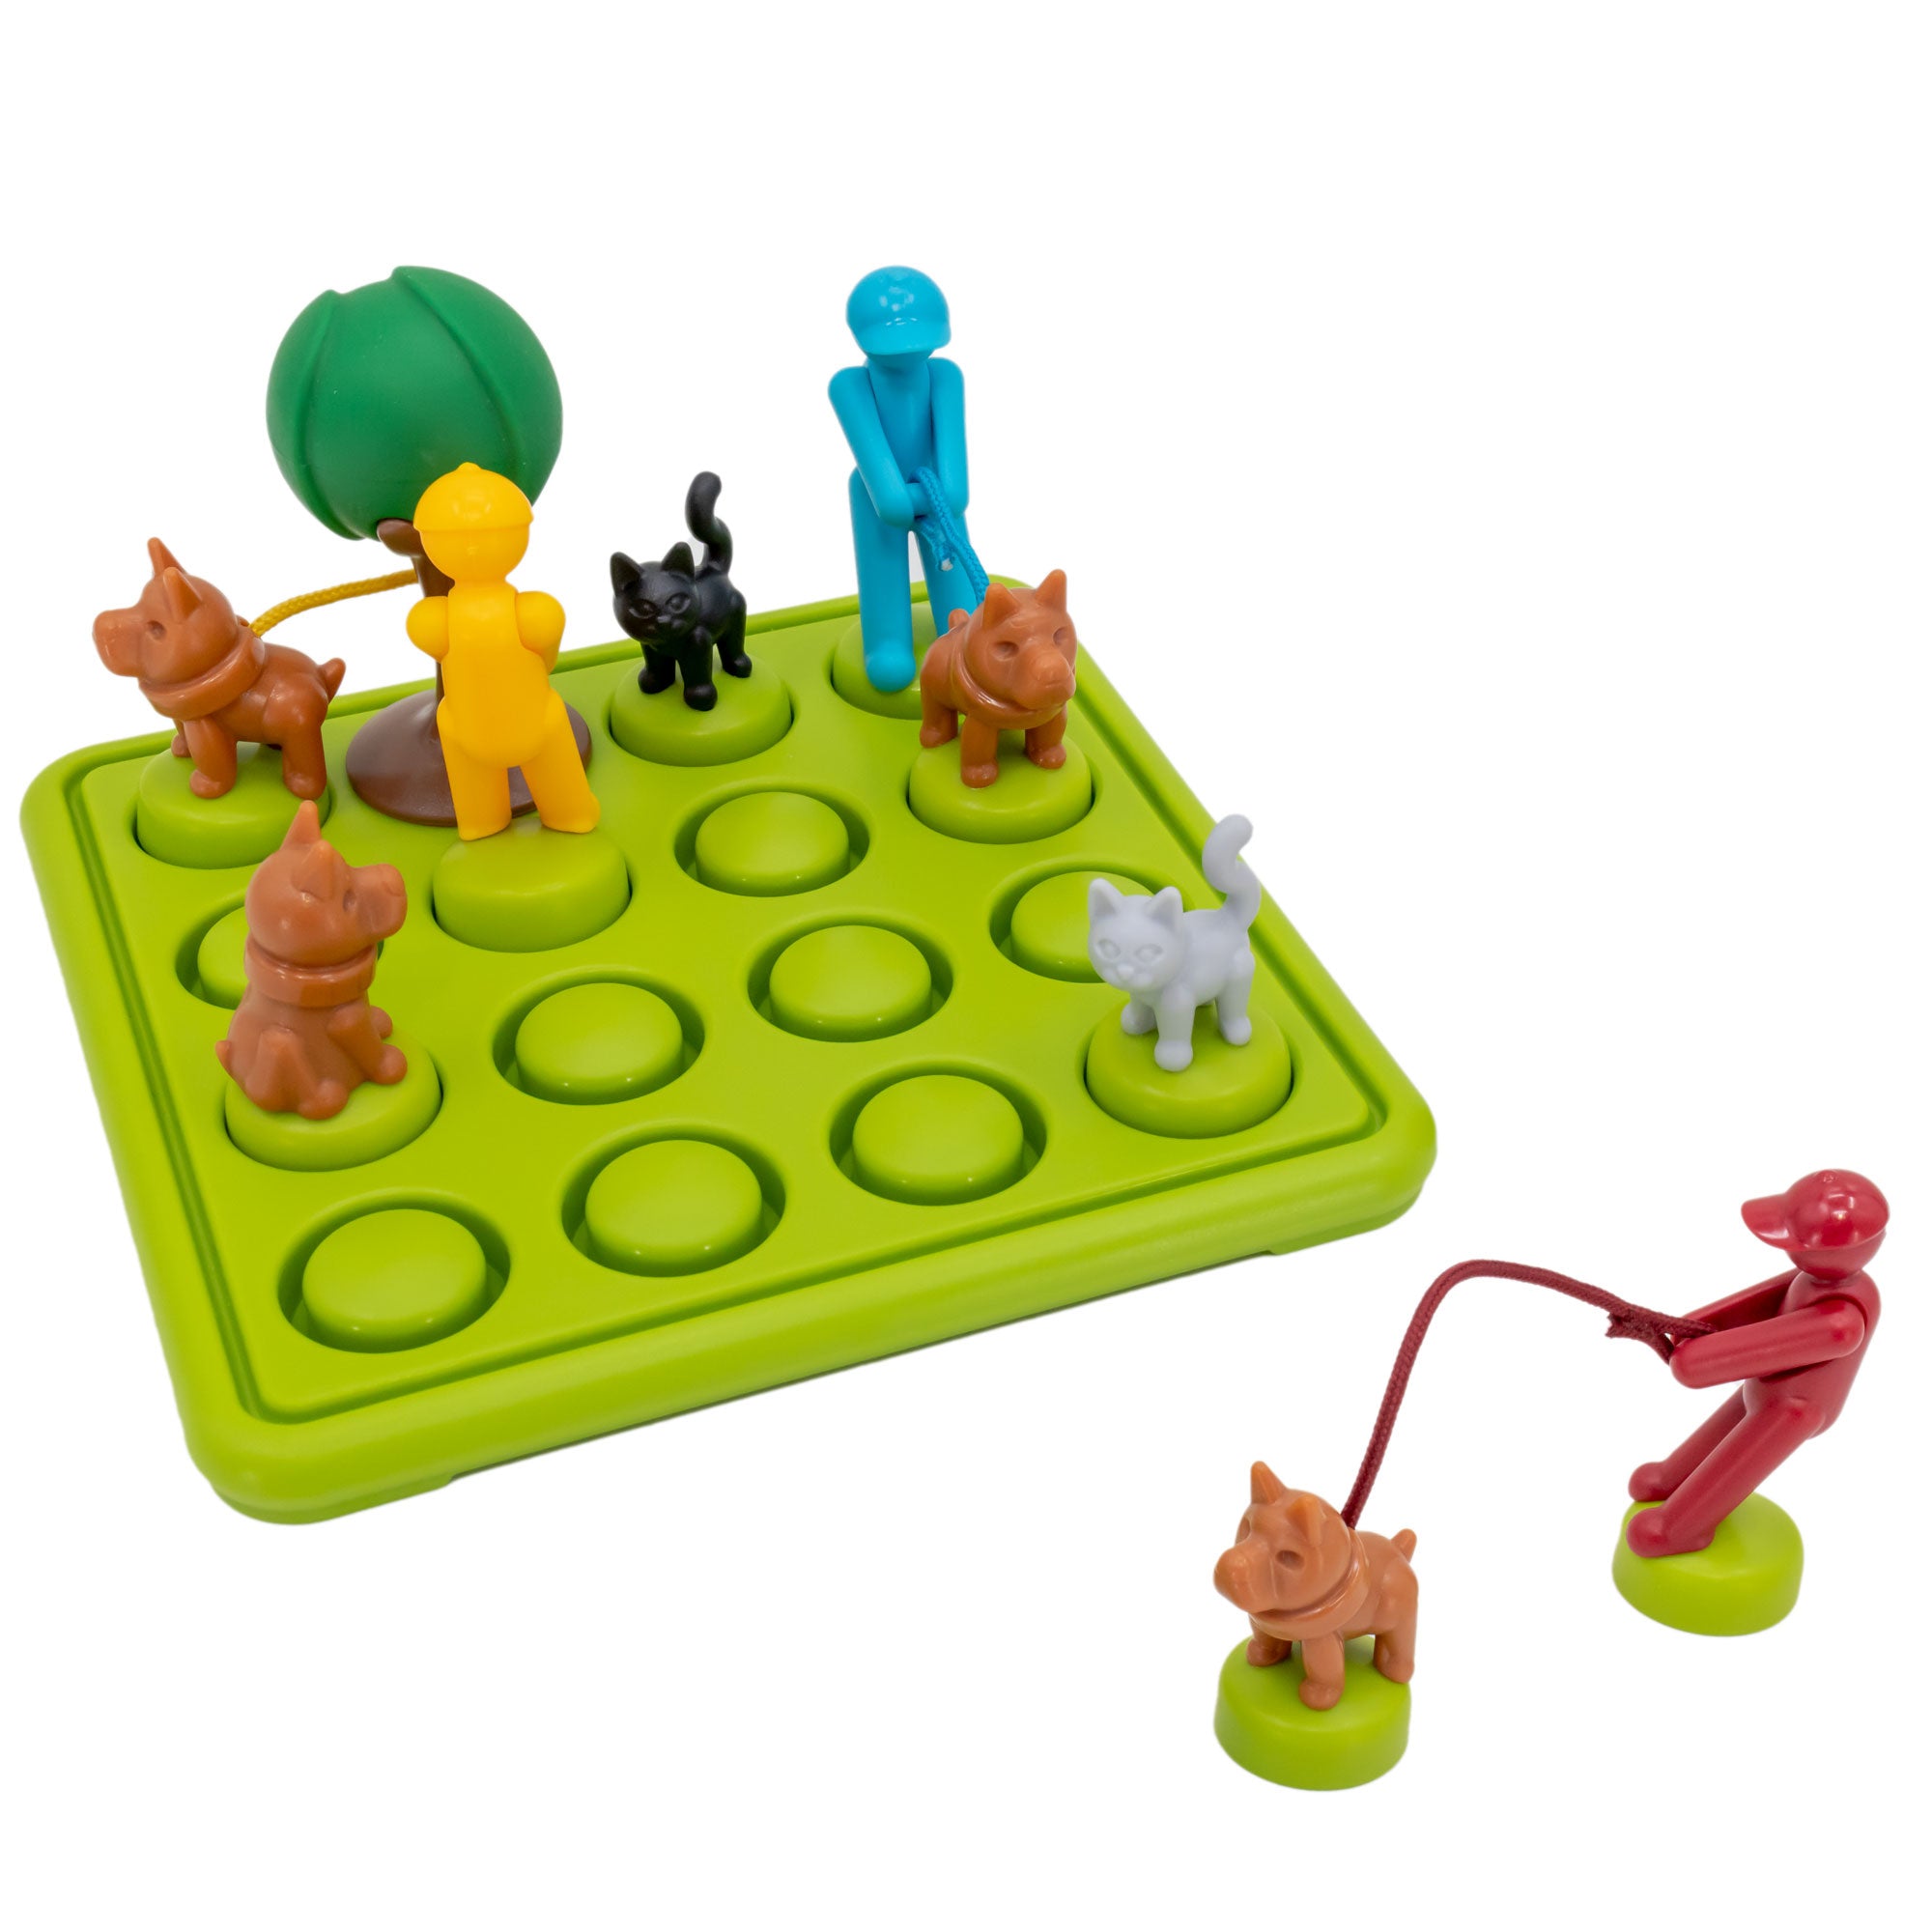 The Walk the Dog Smart Game in play. The square game board is bright green with a grid of 4 by 4 circles that allow pieces to be placed on top. The pieces on top are colorful men with leashes attached to a dog, cats, and a tree piece.